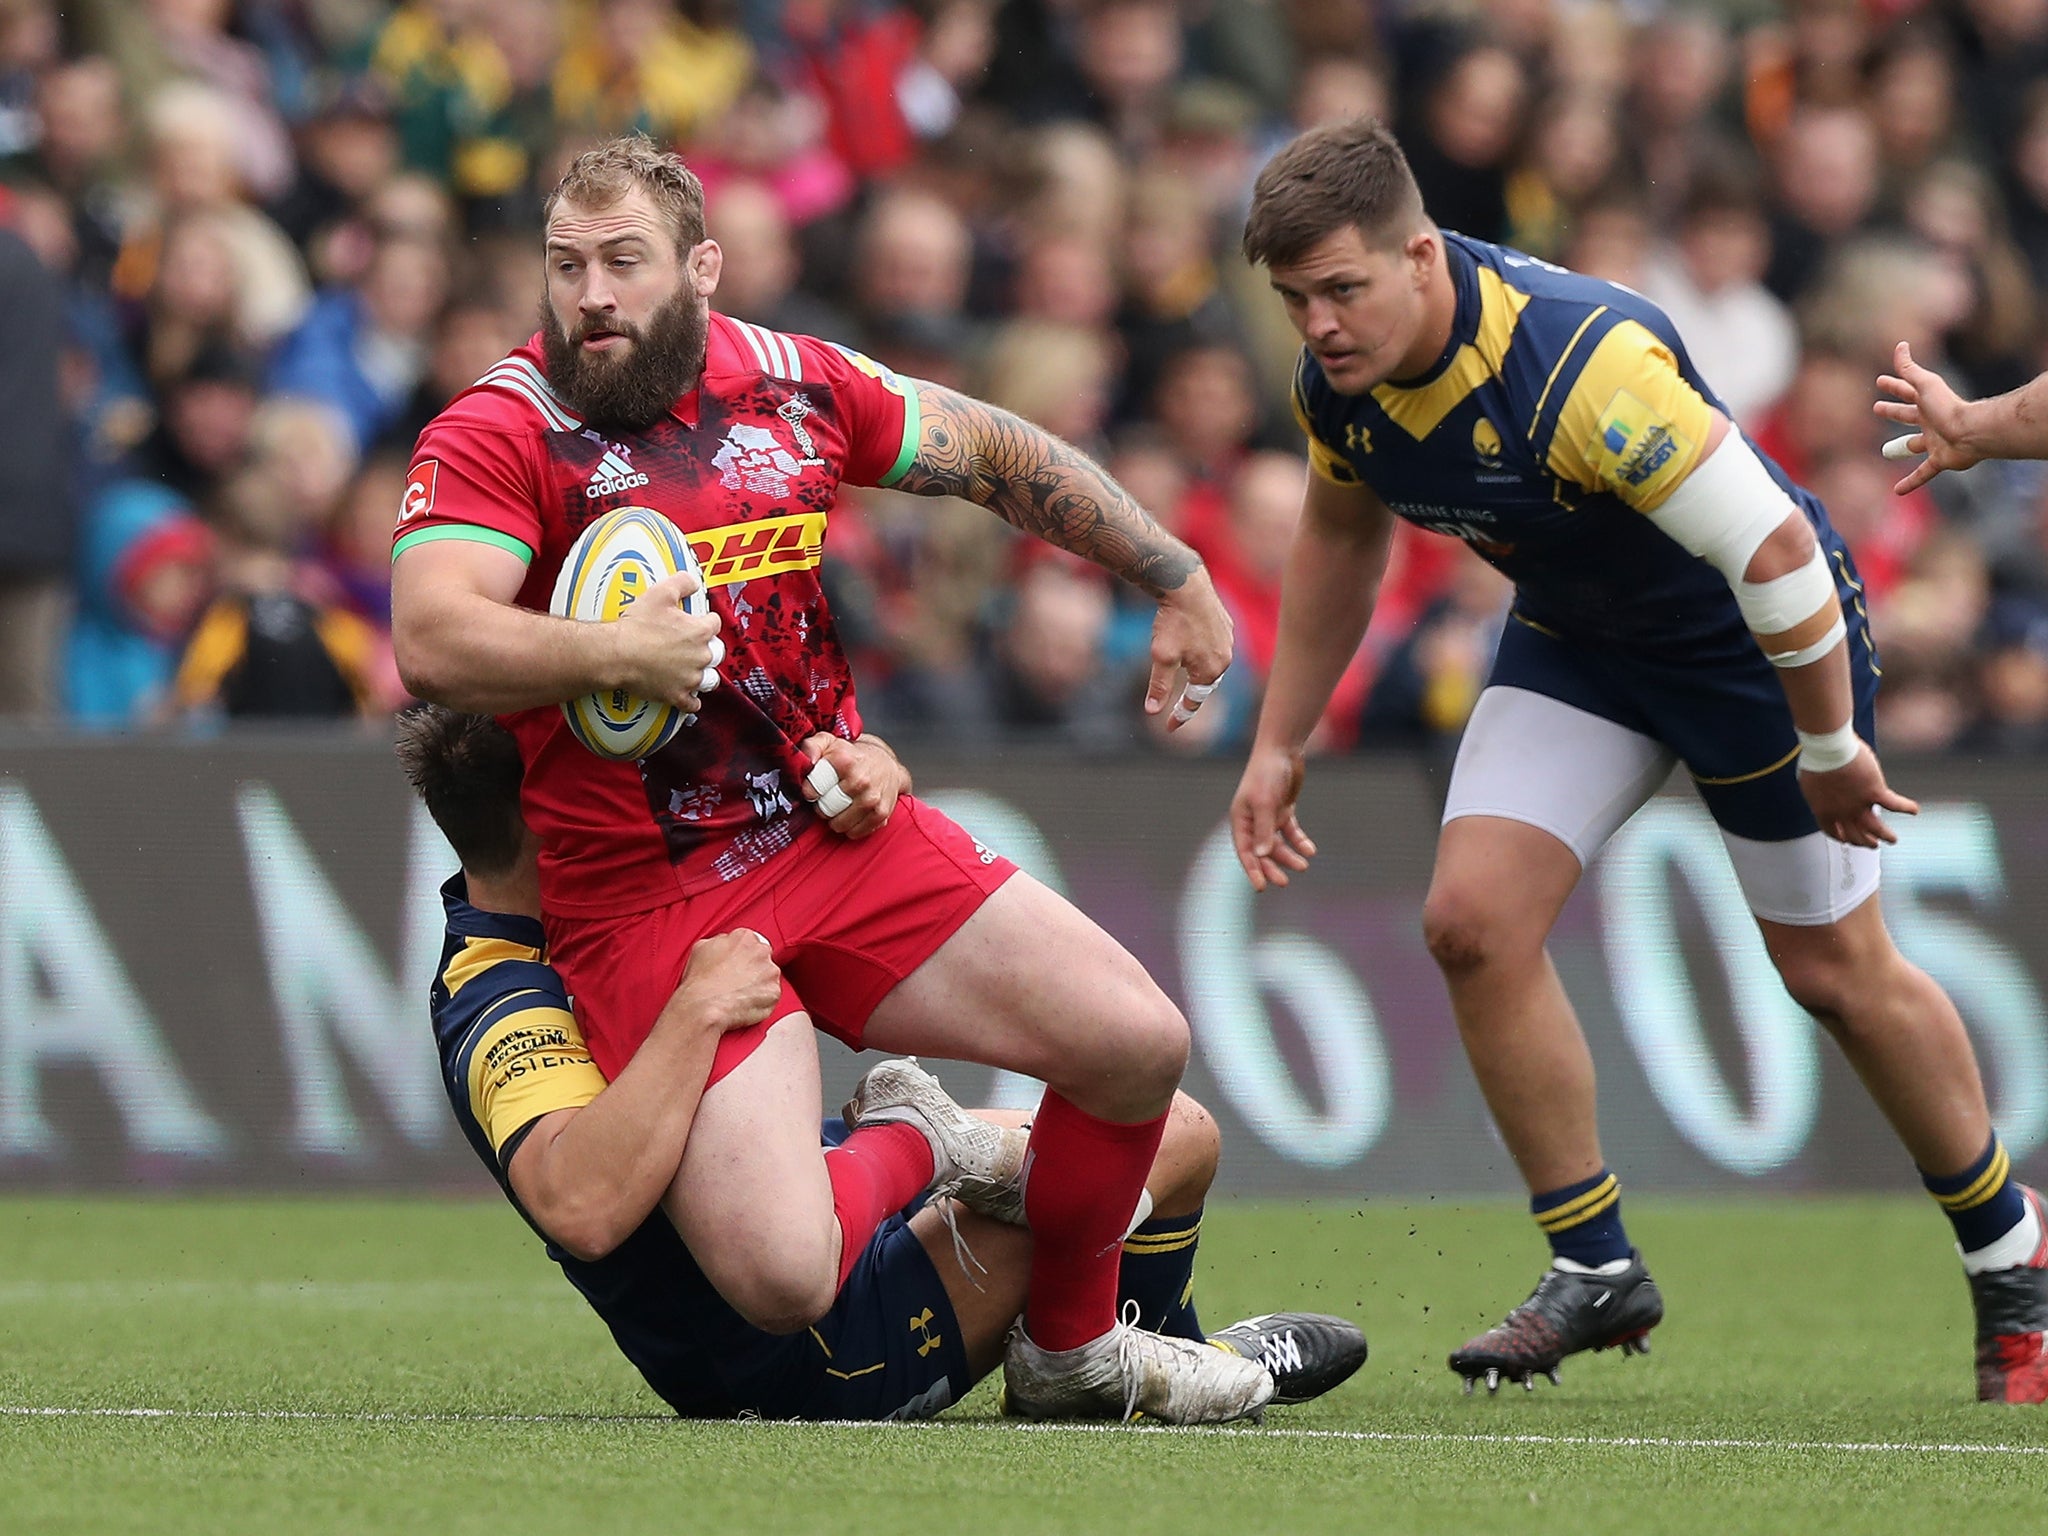 Harlequins have fallen into an end-of-season rut they cannot get themselves out of